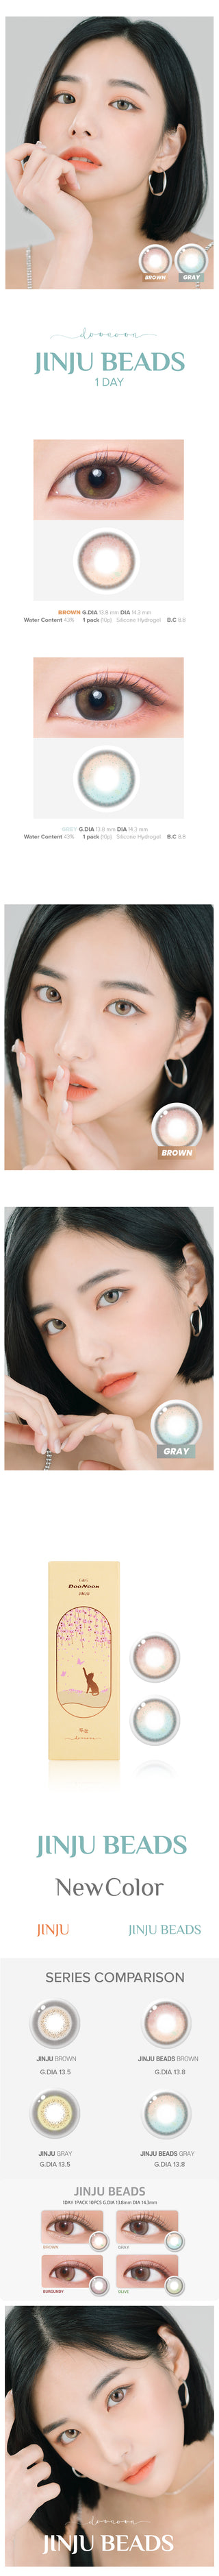 Variety of DooNoon Jinju Beads 1-Day Grey (10pk) contact lens colors displayed, with closeups of an eye wearing the contact lens colors, and with a model wearing the contact lens colors showing realistic eye-enlarging effect from various angles.